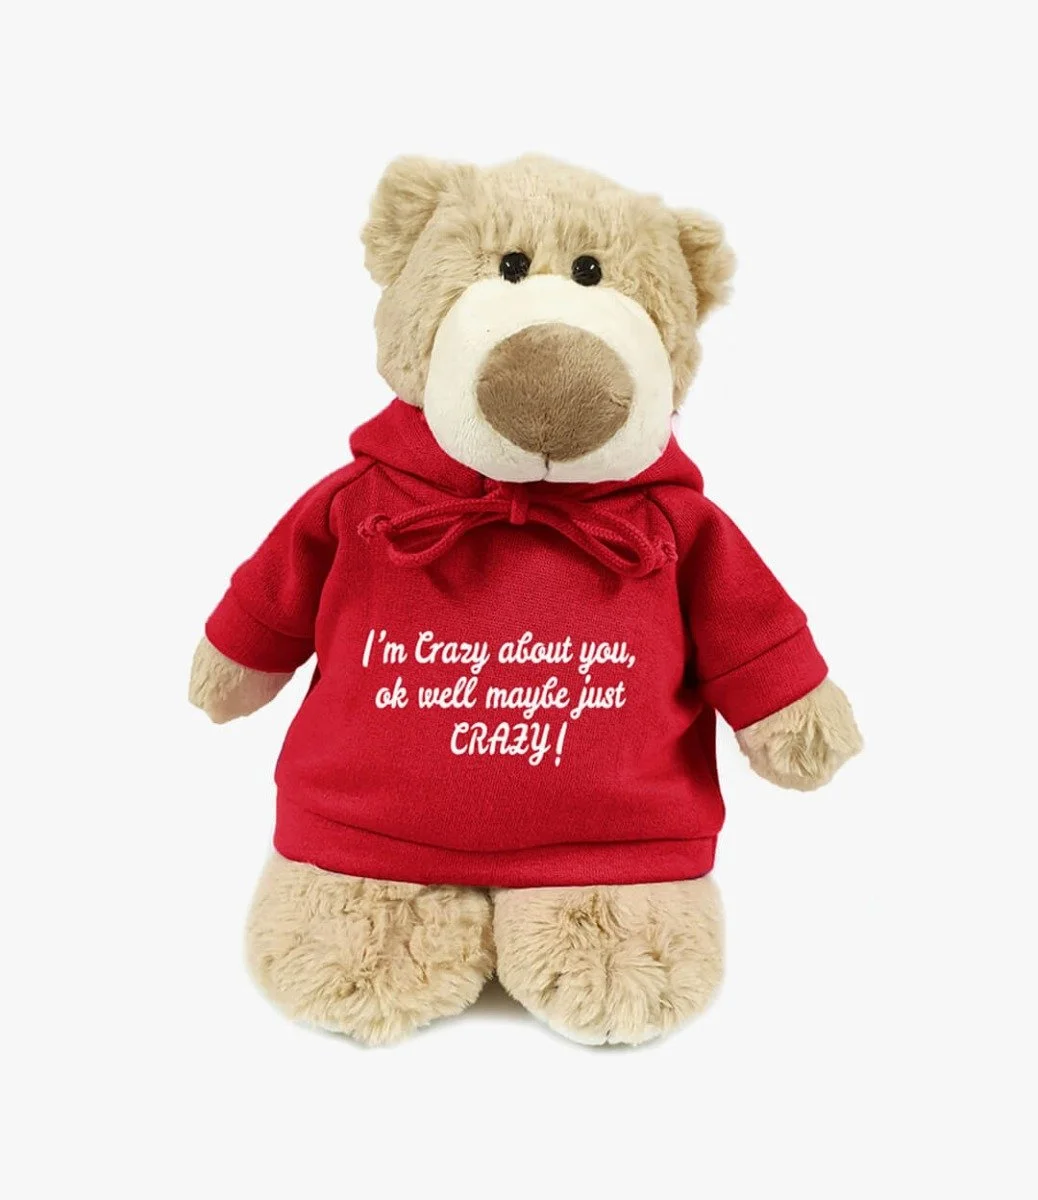 Mascot Bear in Red Hoodie "Crazy About You" by Fay Lawson